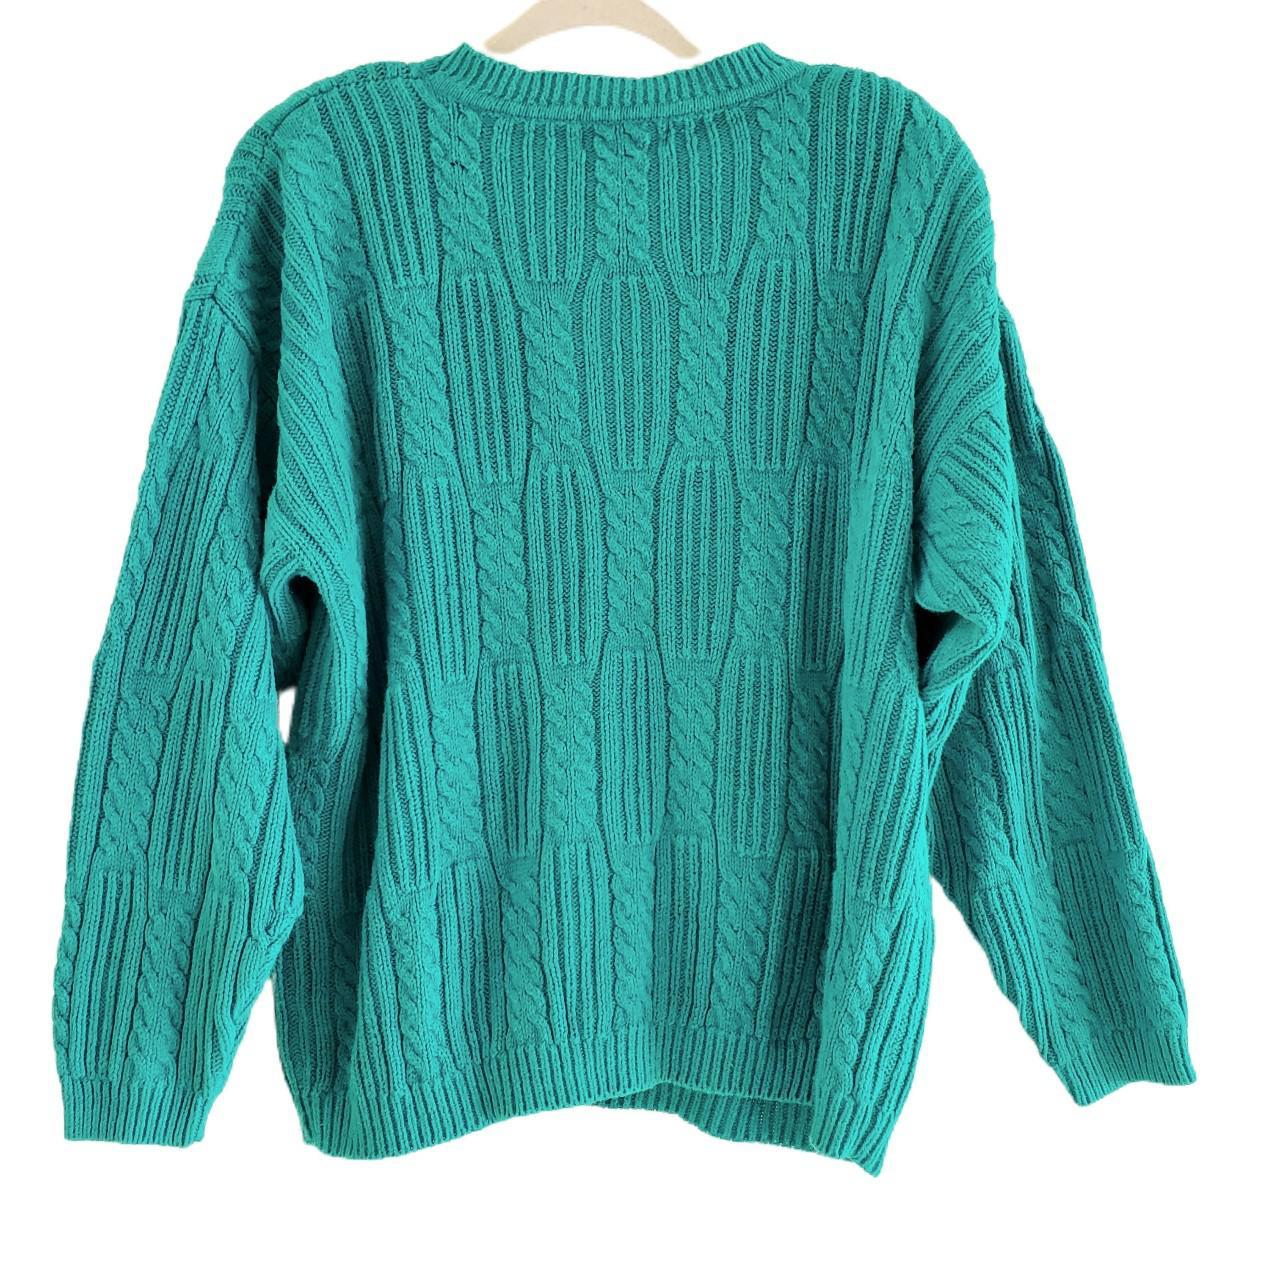 Product Image 3 - Vintage Chunky Knit Emerald Green